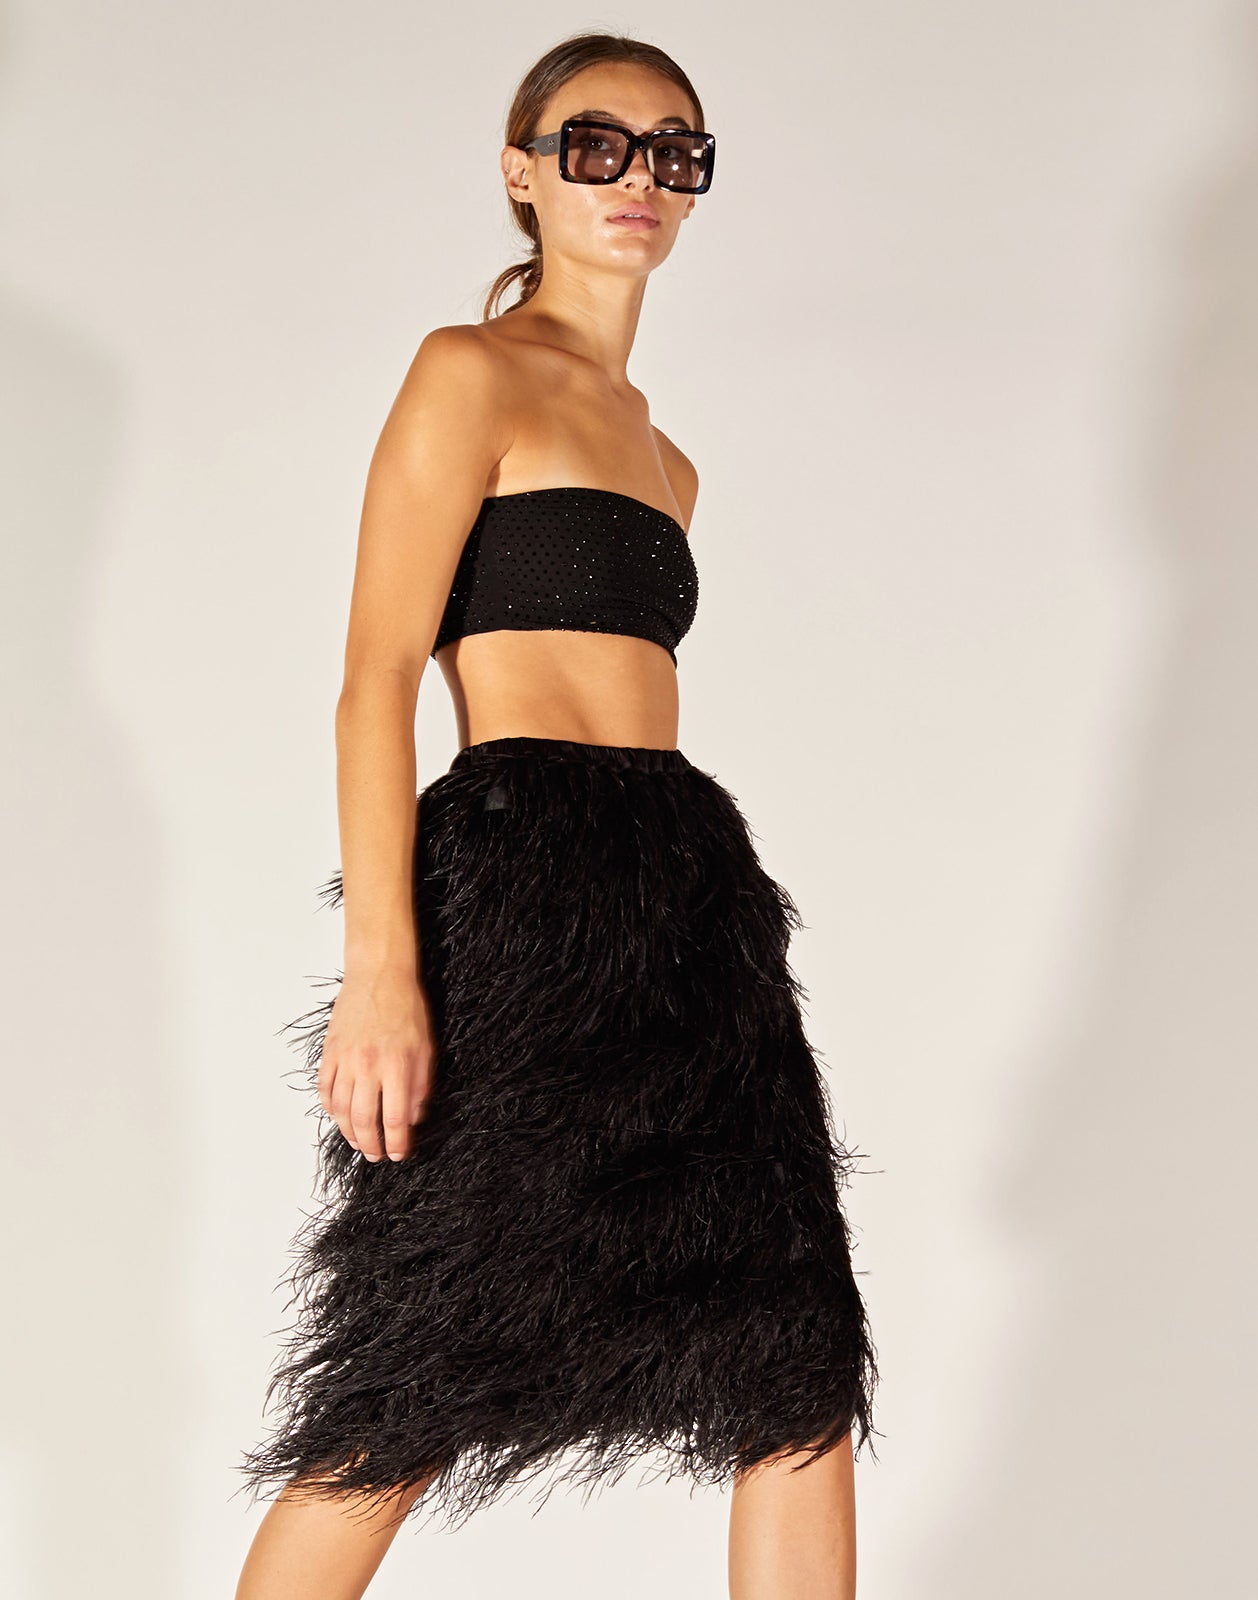 LOLA & POOCH presents feather Skirts––mix & match separates. SALE!